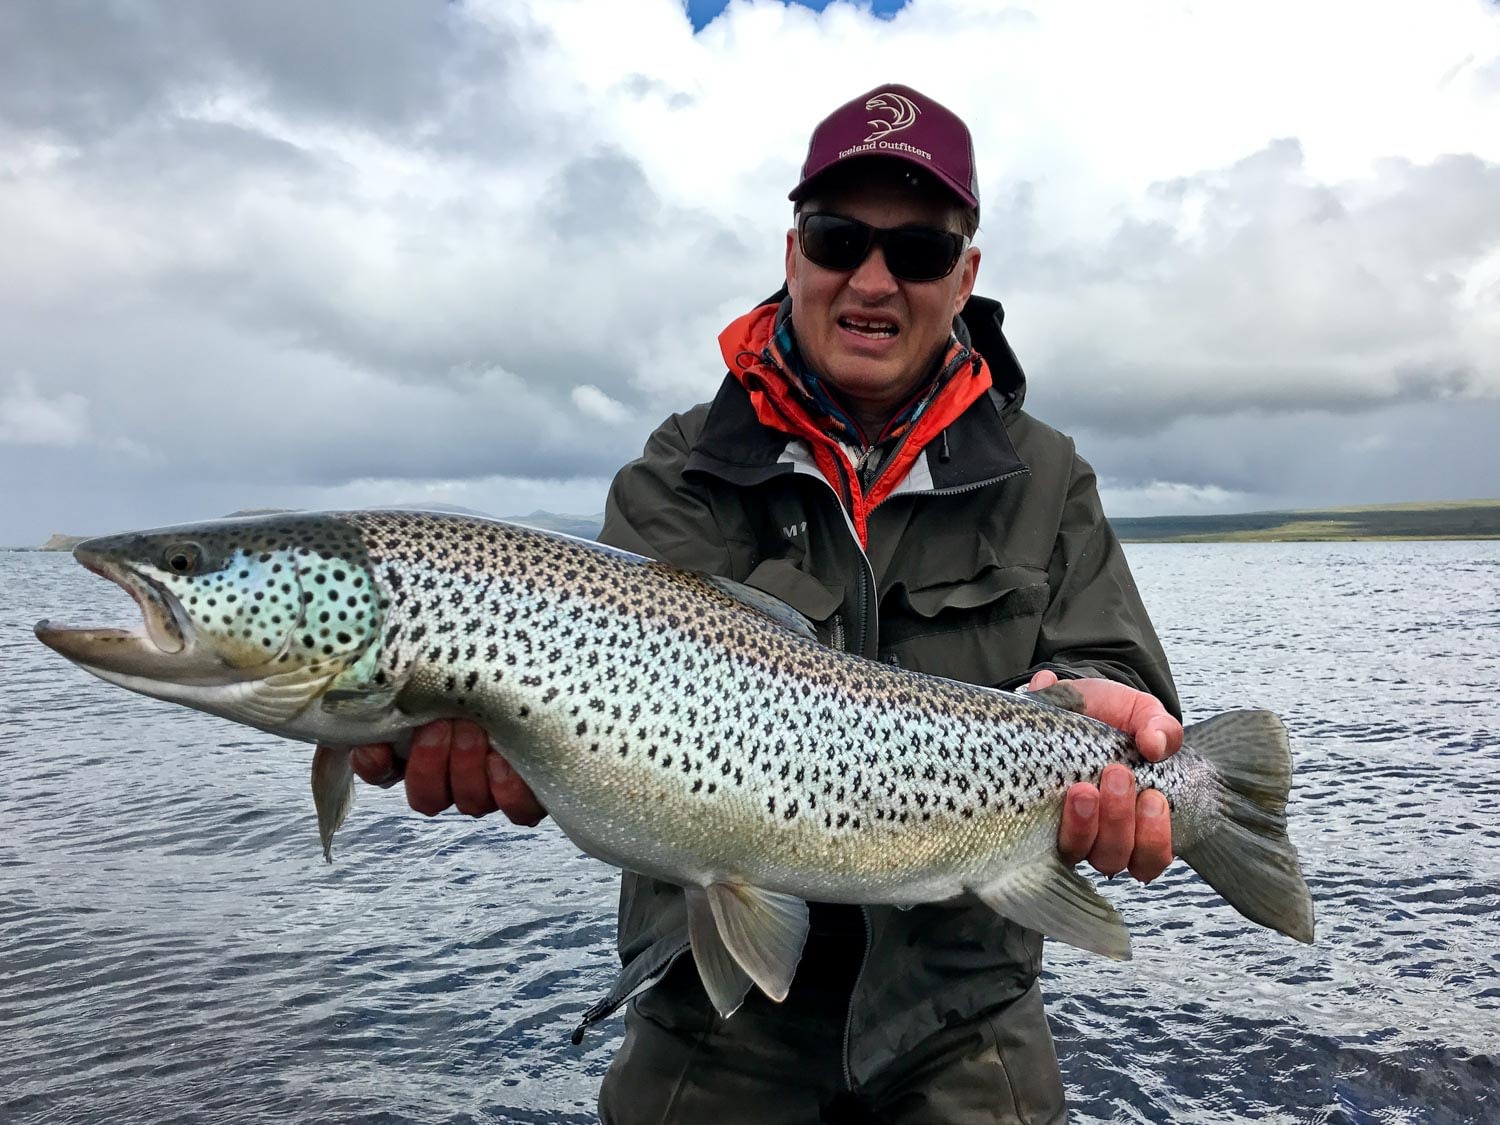 The beauty of fly fishing in Iceland is captured in one photo at Lake Thingvellir